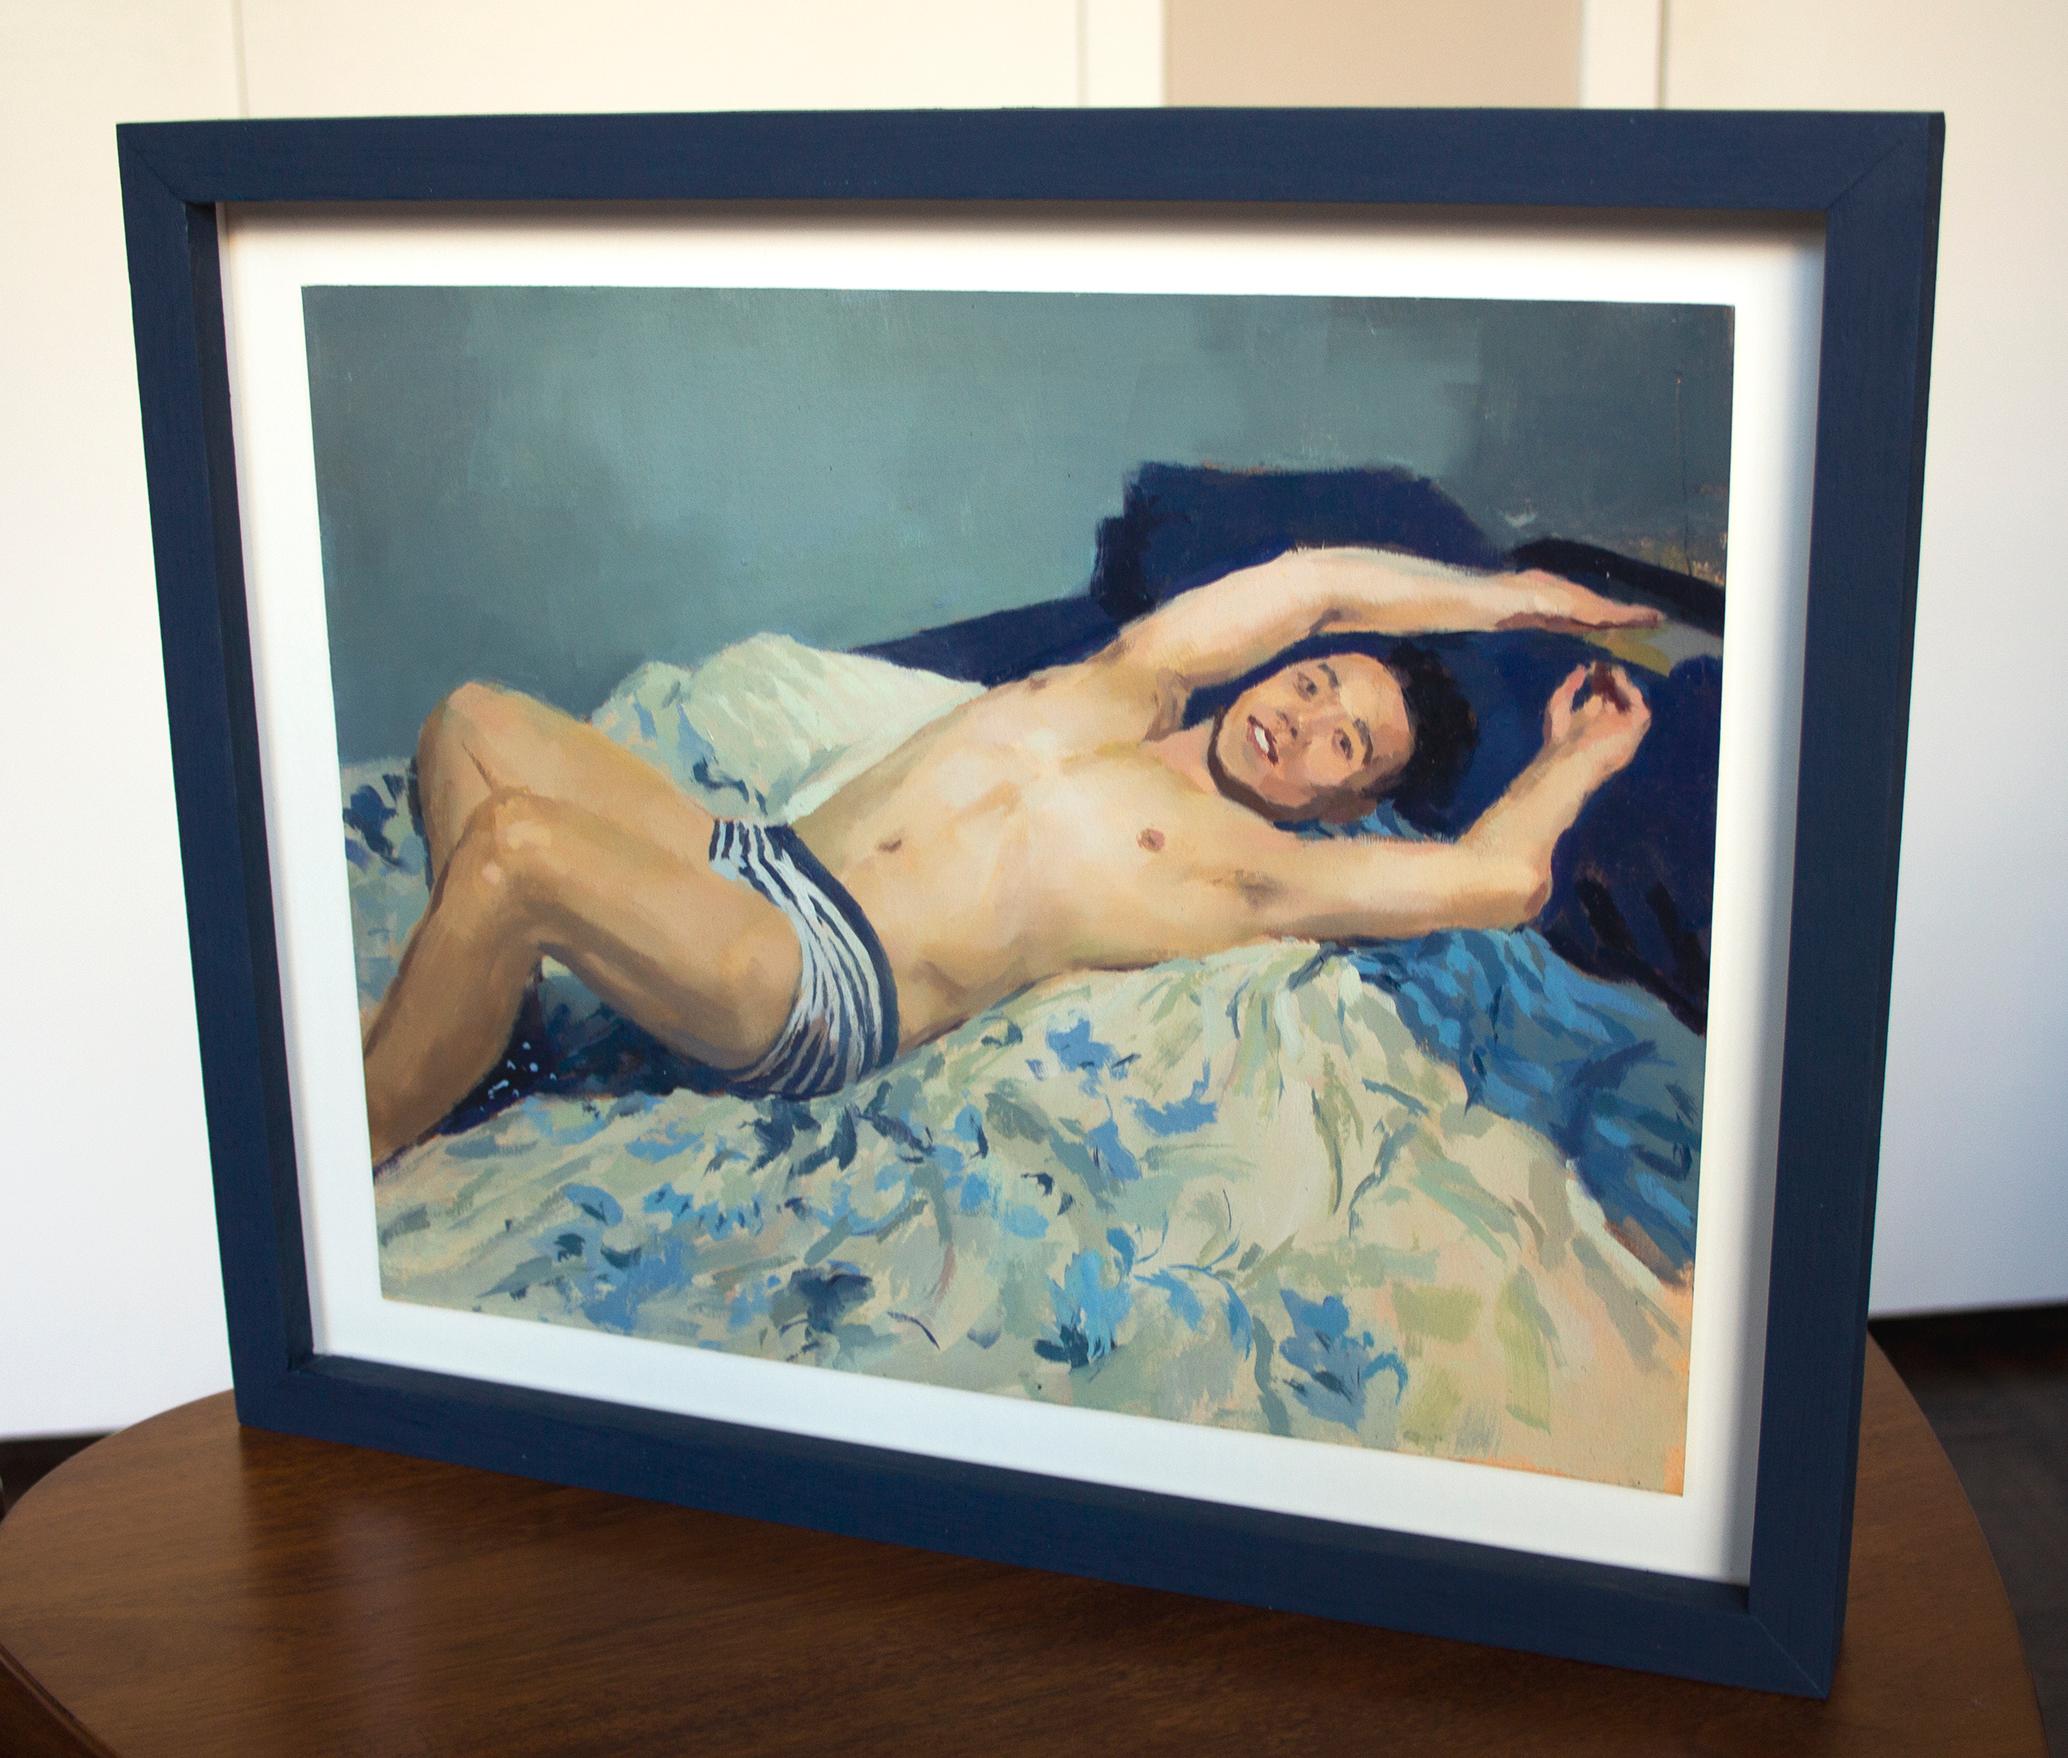 This image is part of the artist's early series of portraits depicting queer subject matter in domestic settings, painted to resemble a private snapshot.